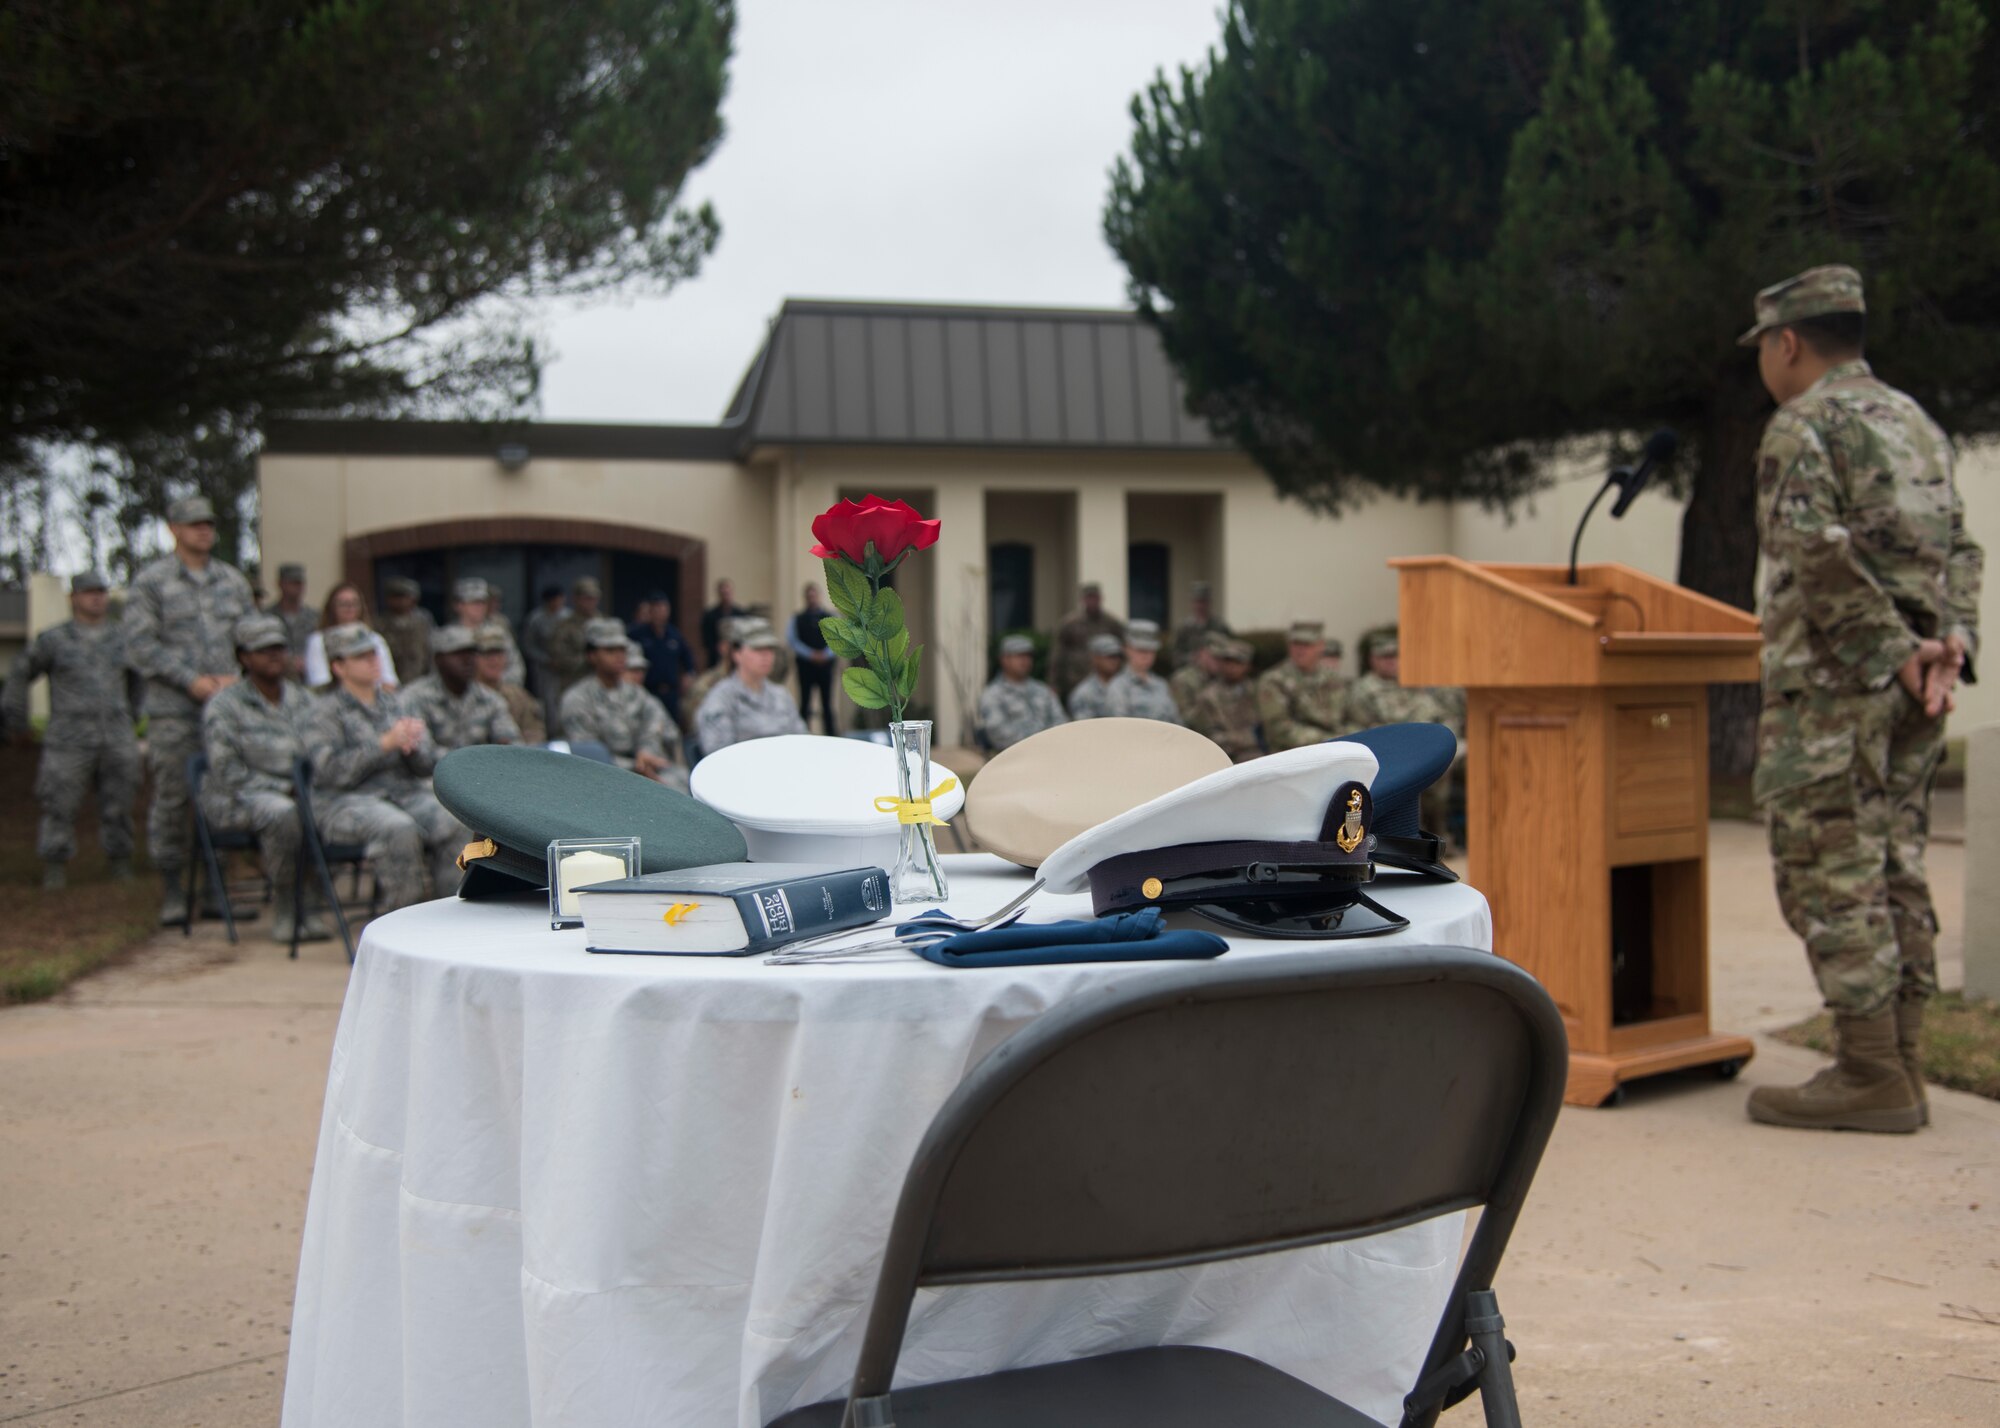 Service members gather during the POW/MIA Opening Ceremony Sept. 16, 2019, at Vandenberg Air Force Base, Calif.